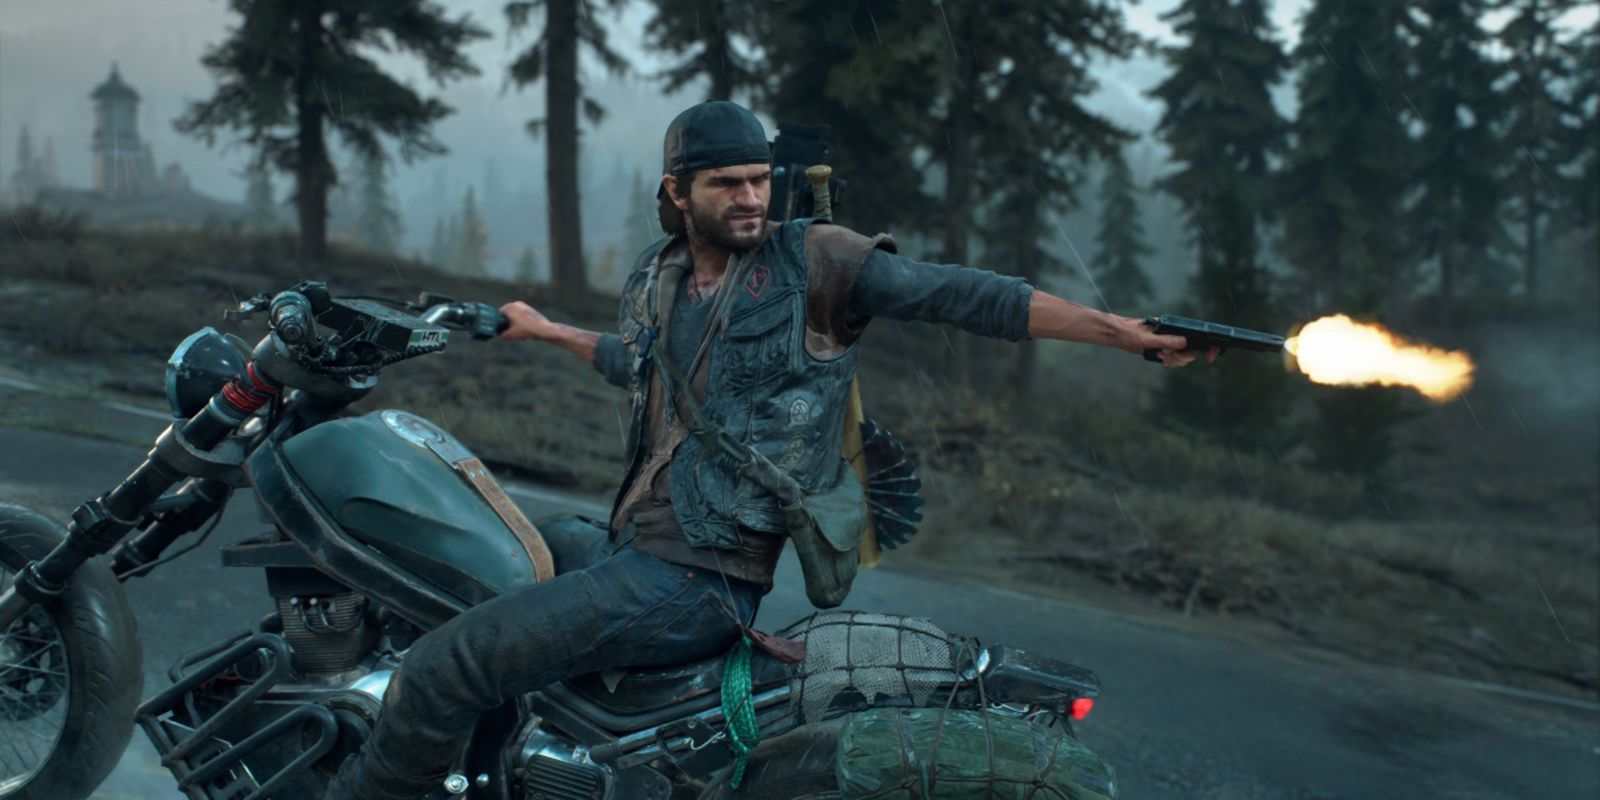 Days Gone Deacon Shooting From Motorcycle